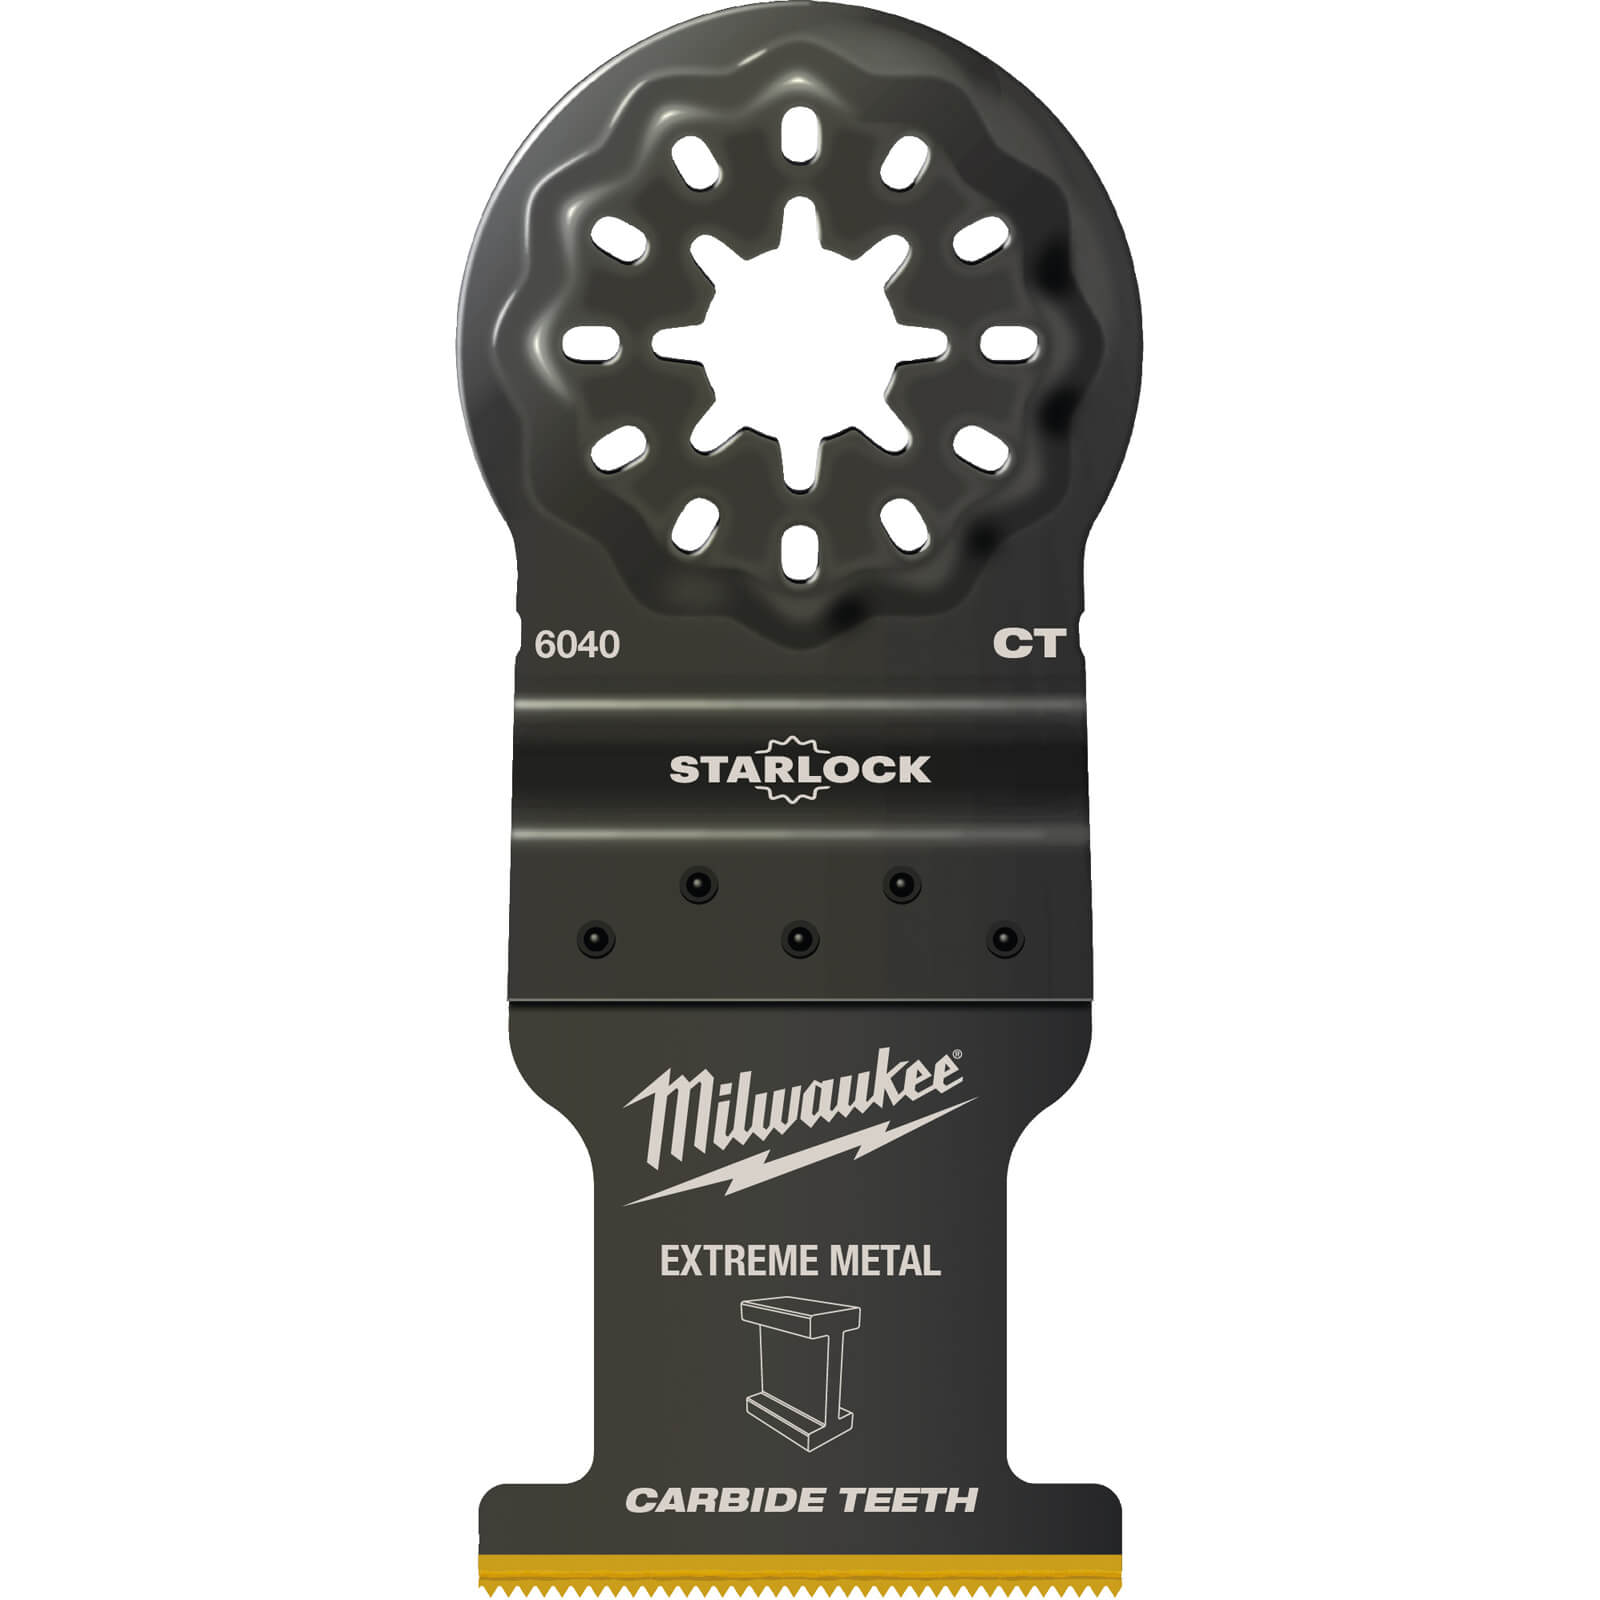 Image of Milwaukee Starlock Oscillating Multi Tool Plunge Carbide Saw Blade 35mm Pack of 1